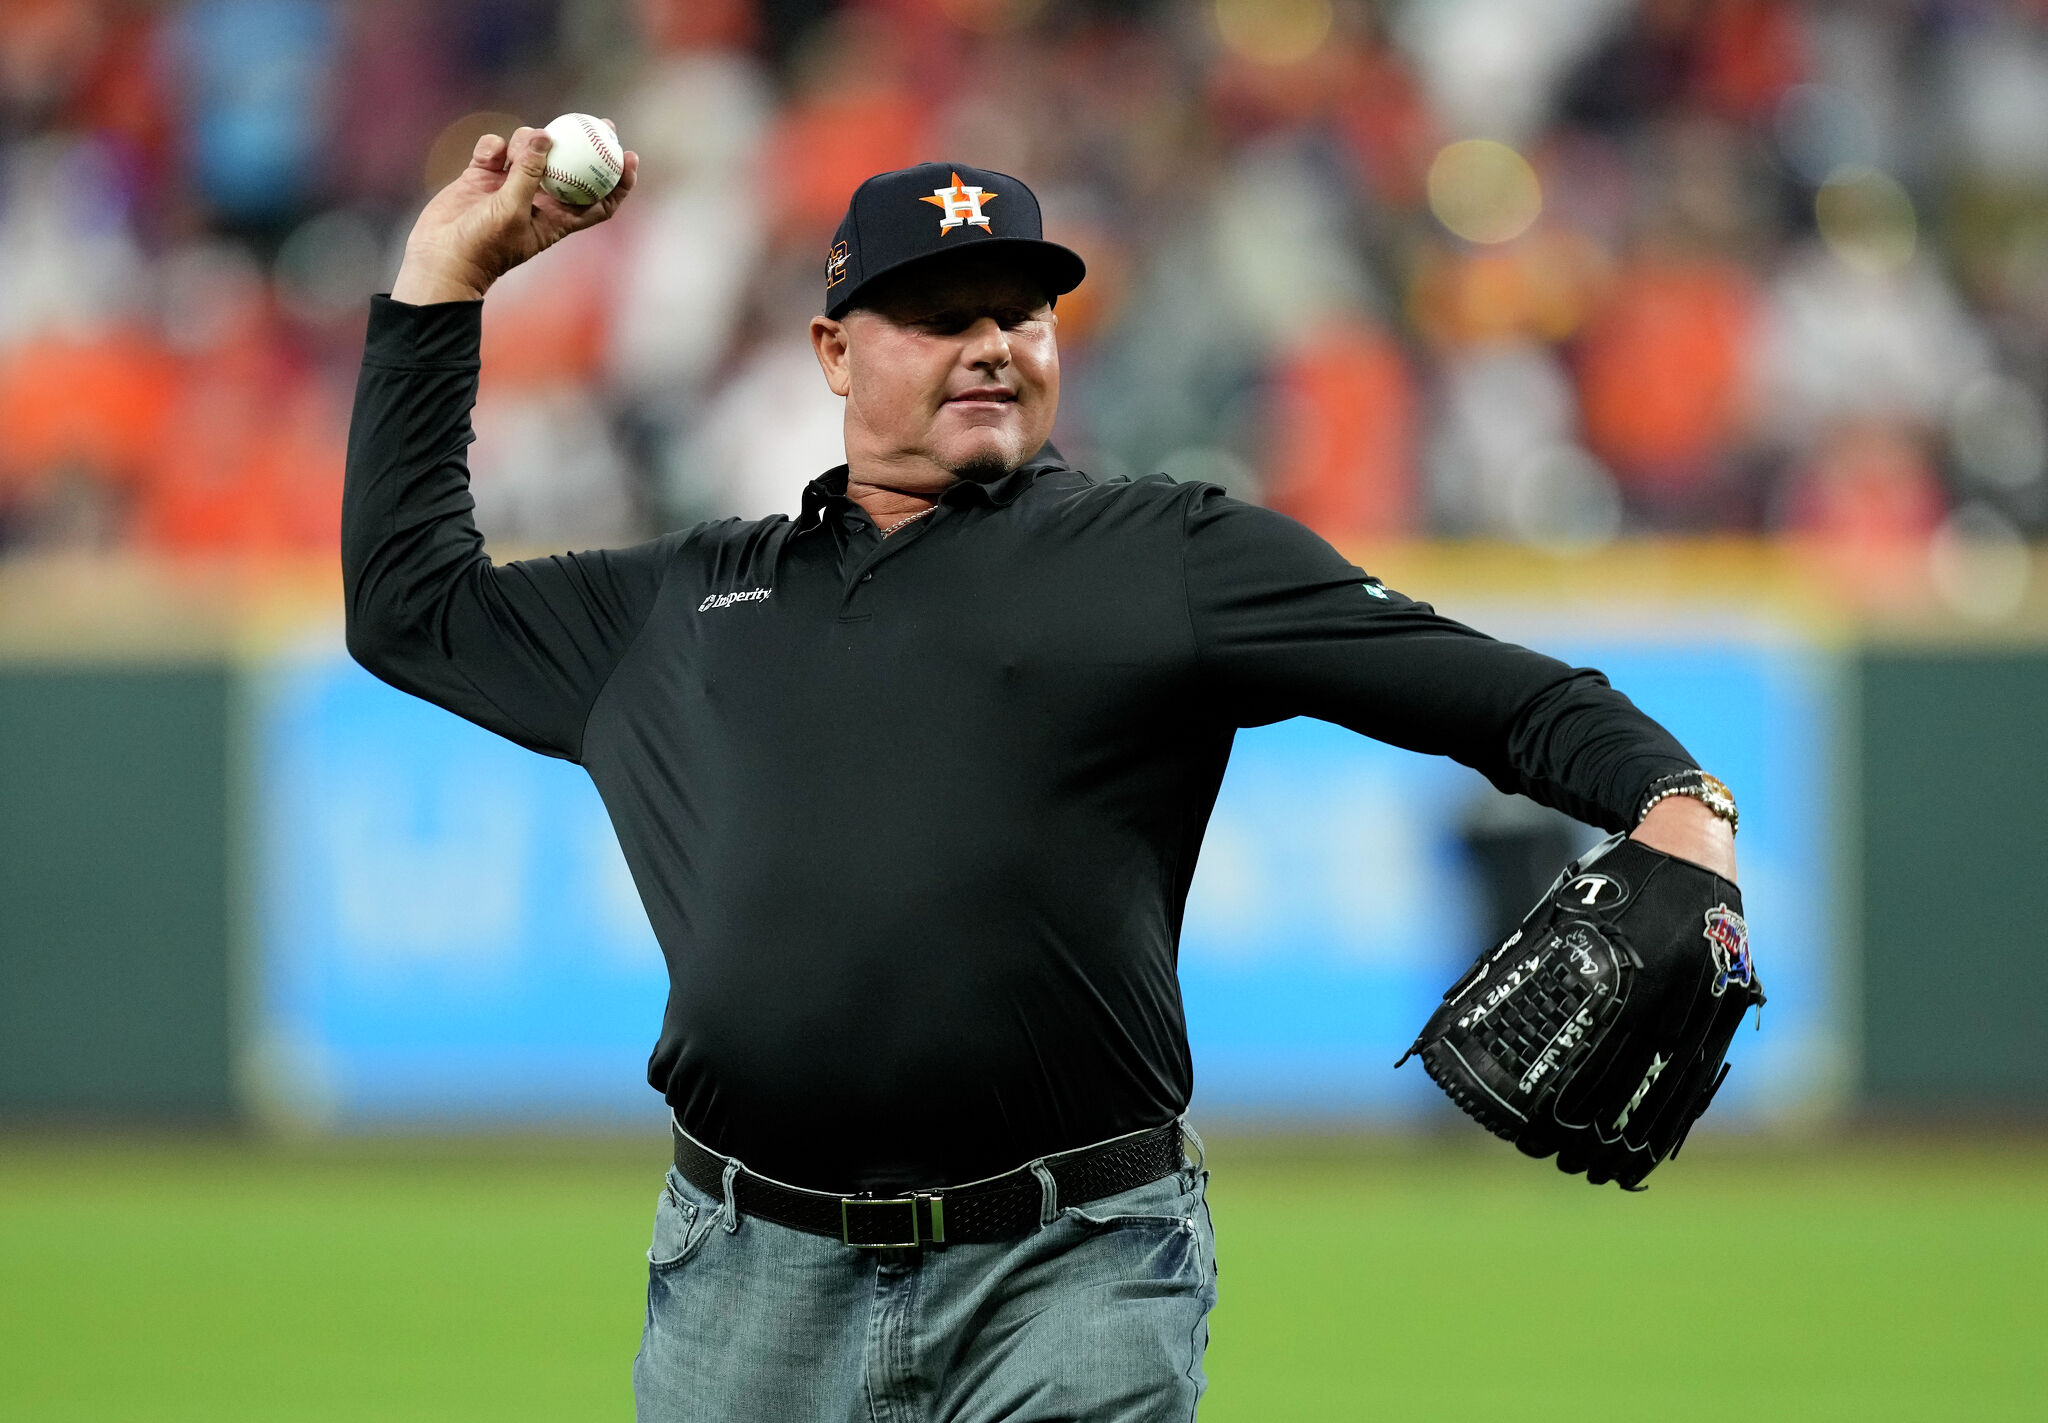 Astros greats Jeff Bagwell, Roger Clemens on World Series title